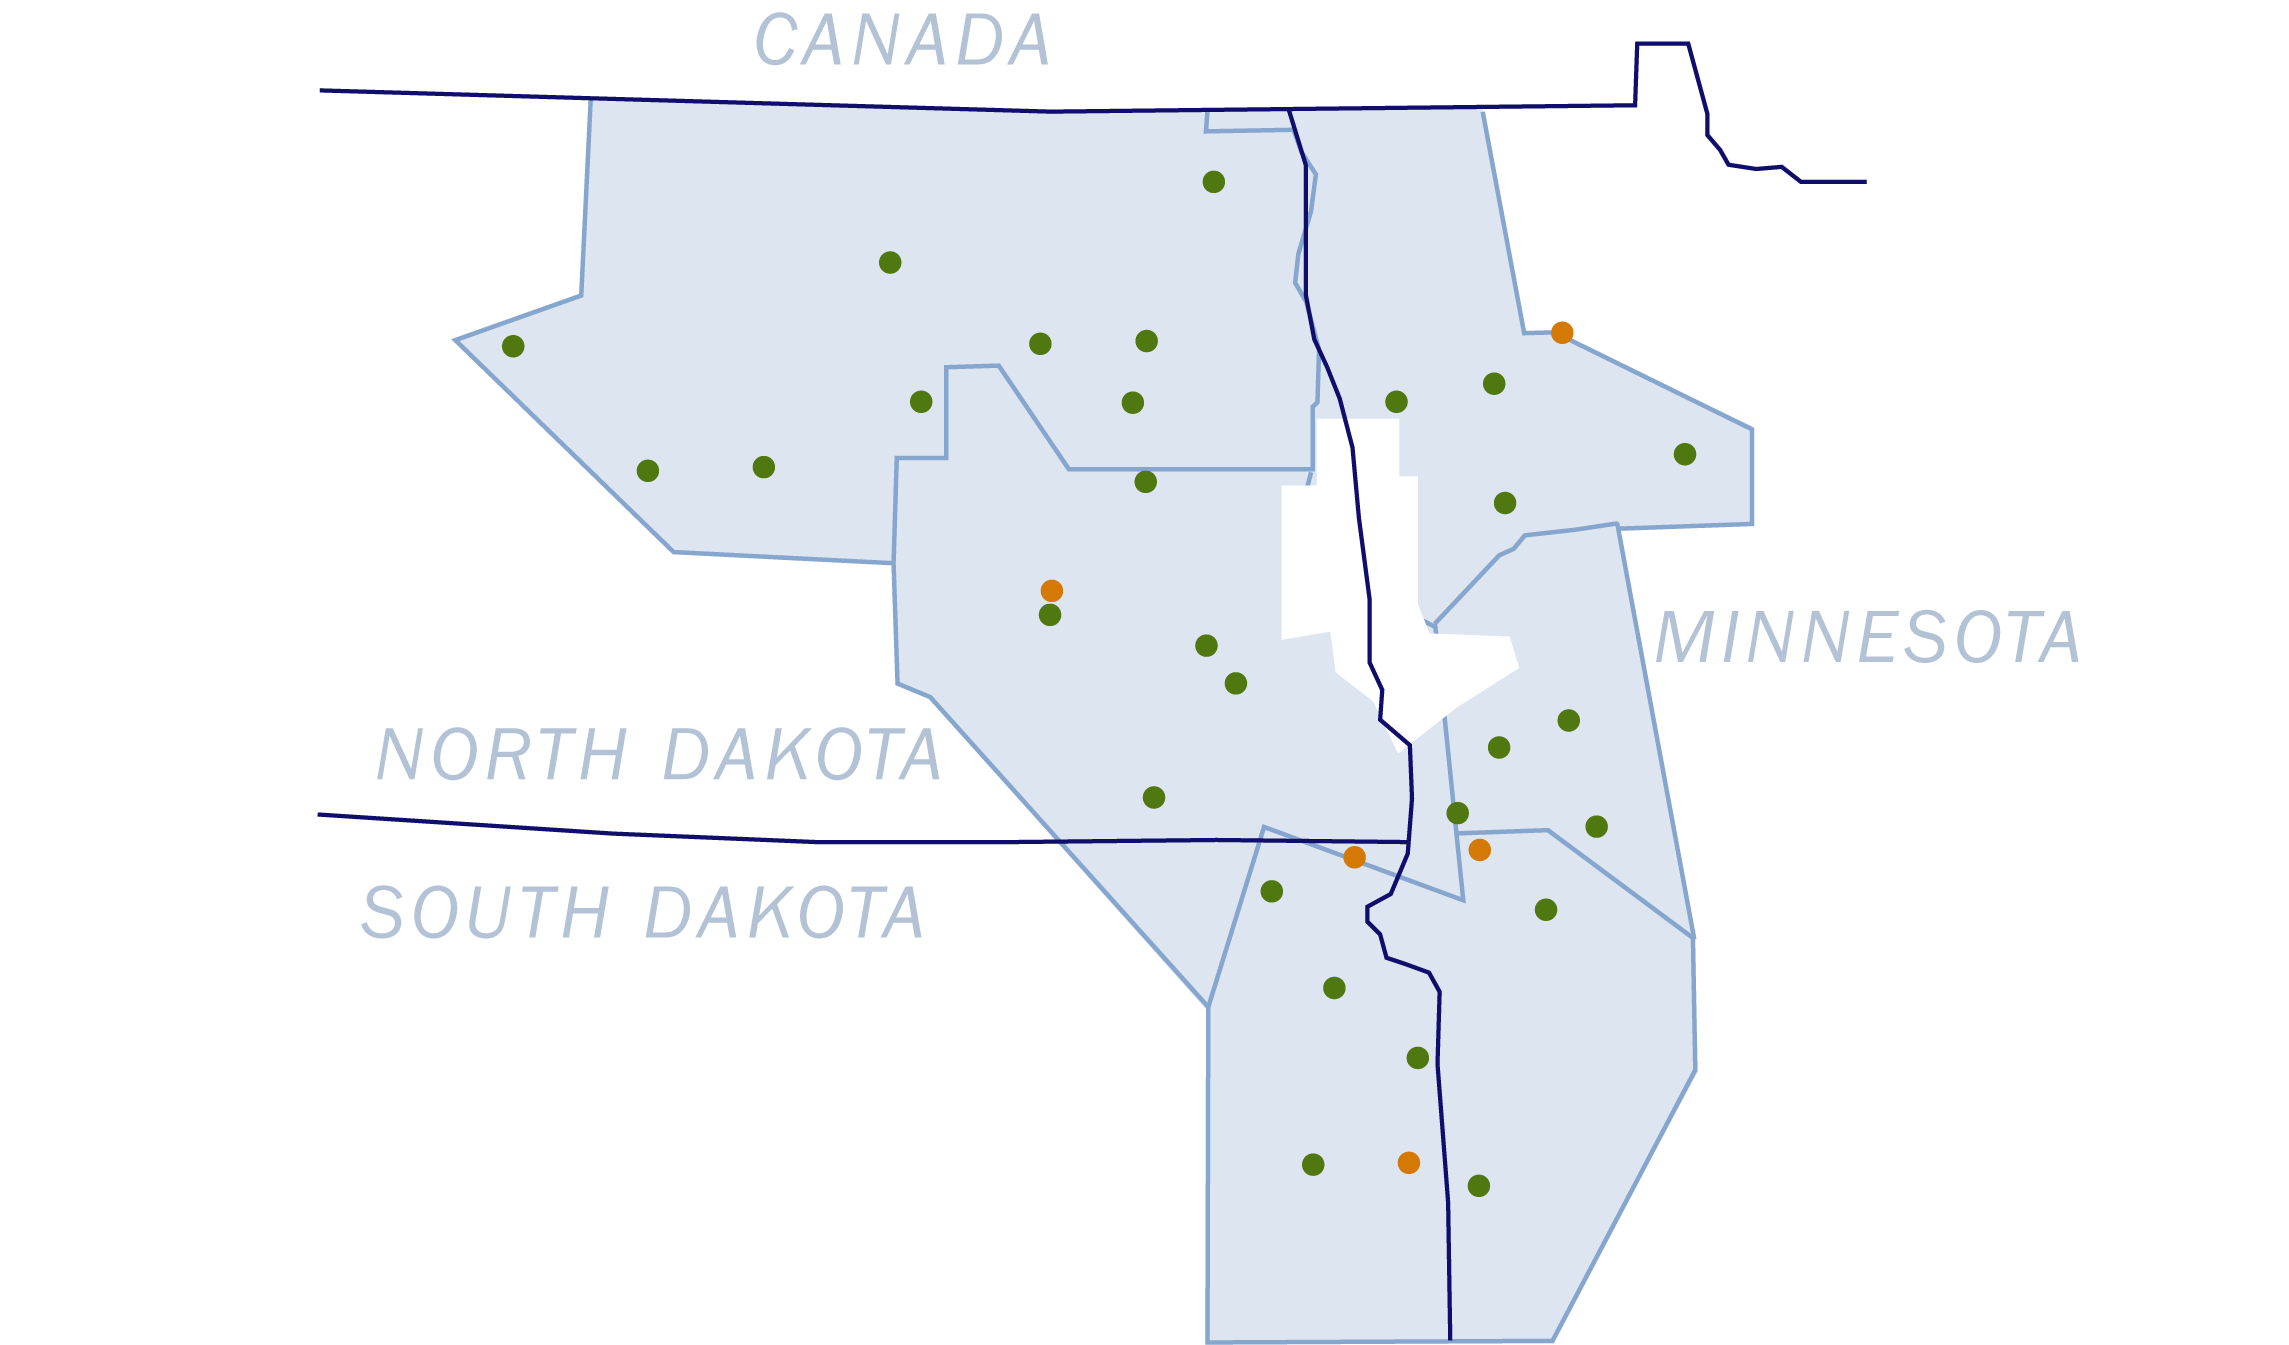 Areas with improvement projects are shown in green; areas with substation projects are shown in orange.